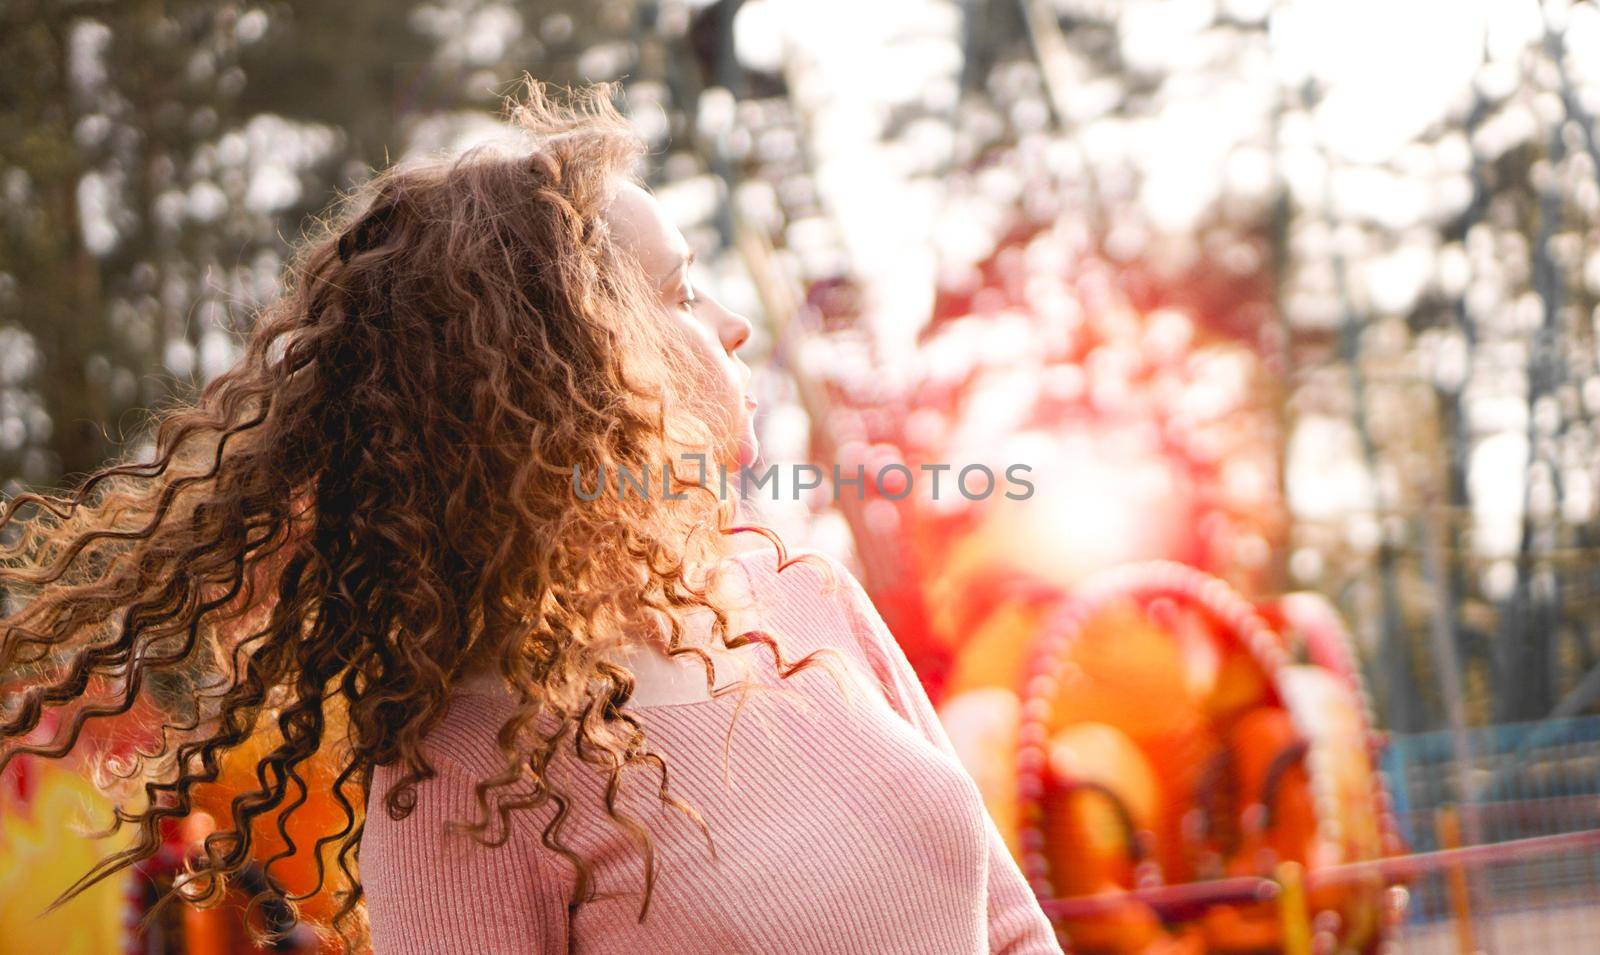 Girl chilling in amusement park in weekend morning. Laughing good-humoured female model with curly hair standing near carousel.